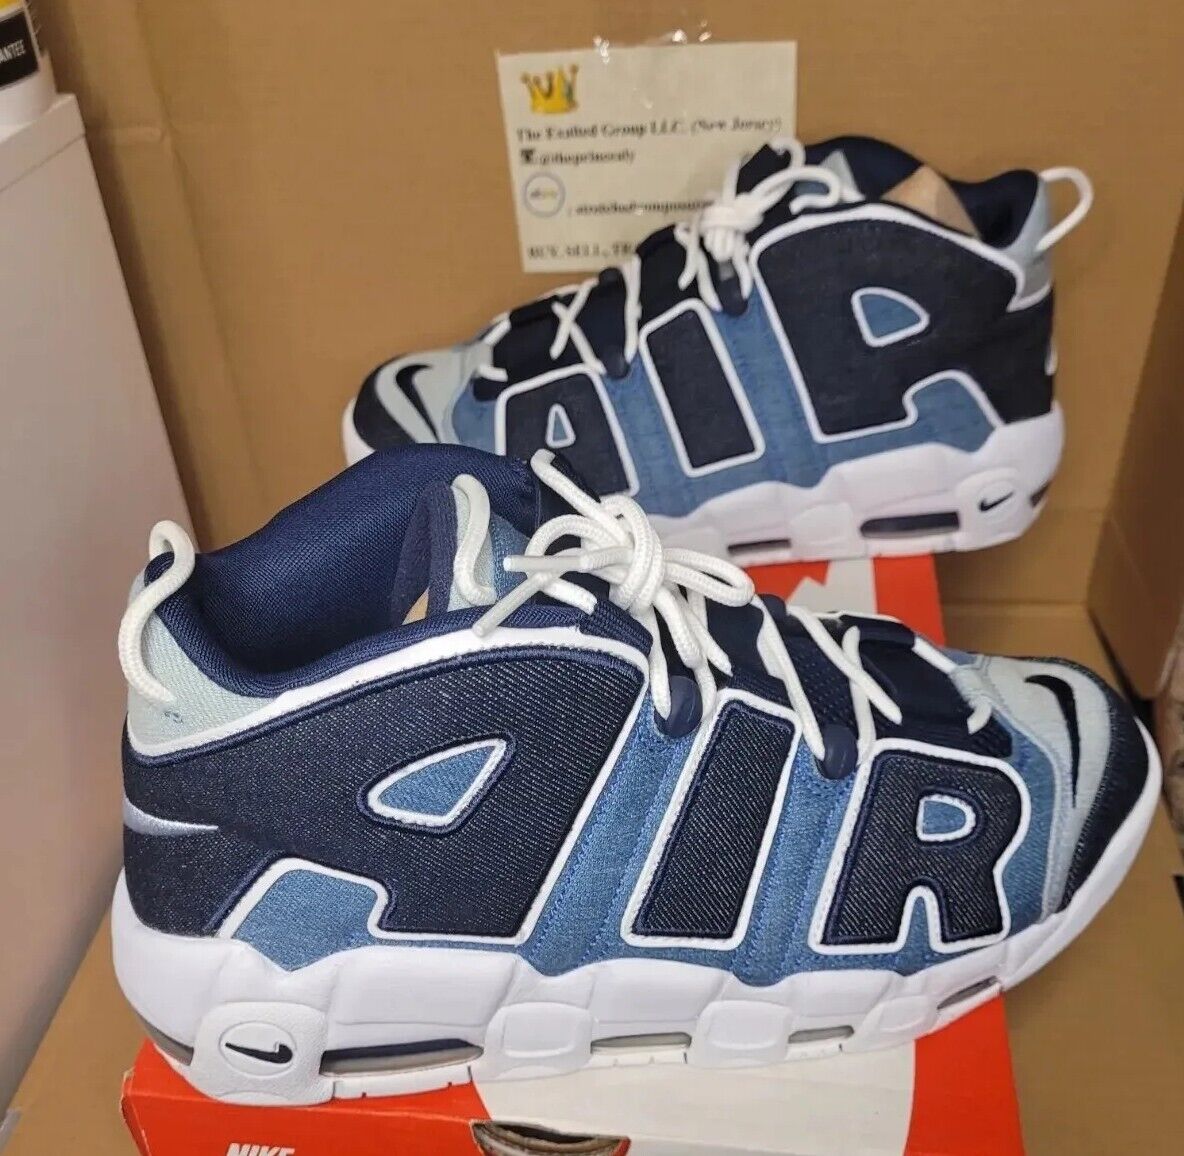 PC/タブレット ノートPC NEW Nike Air More Uptempo Denim Size 11 CJ6125 100